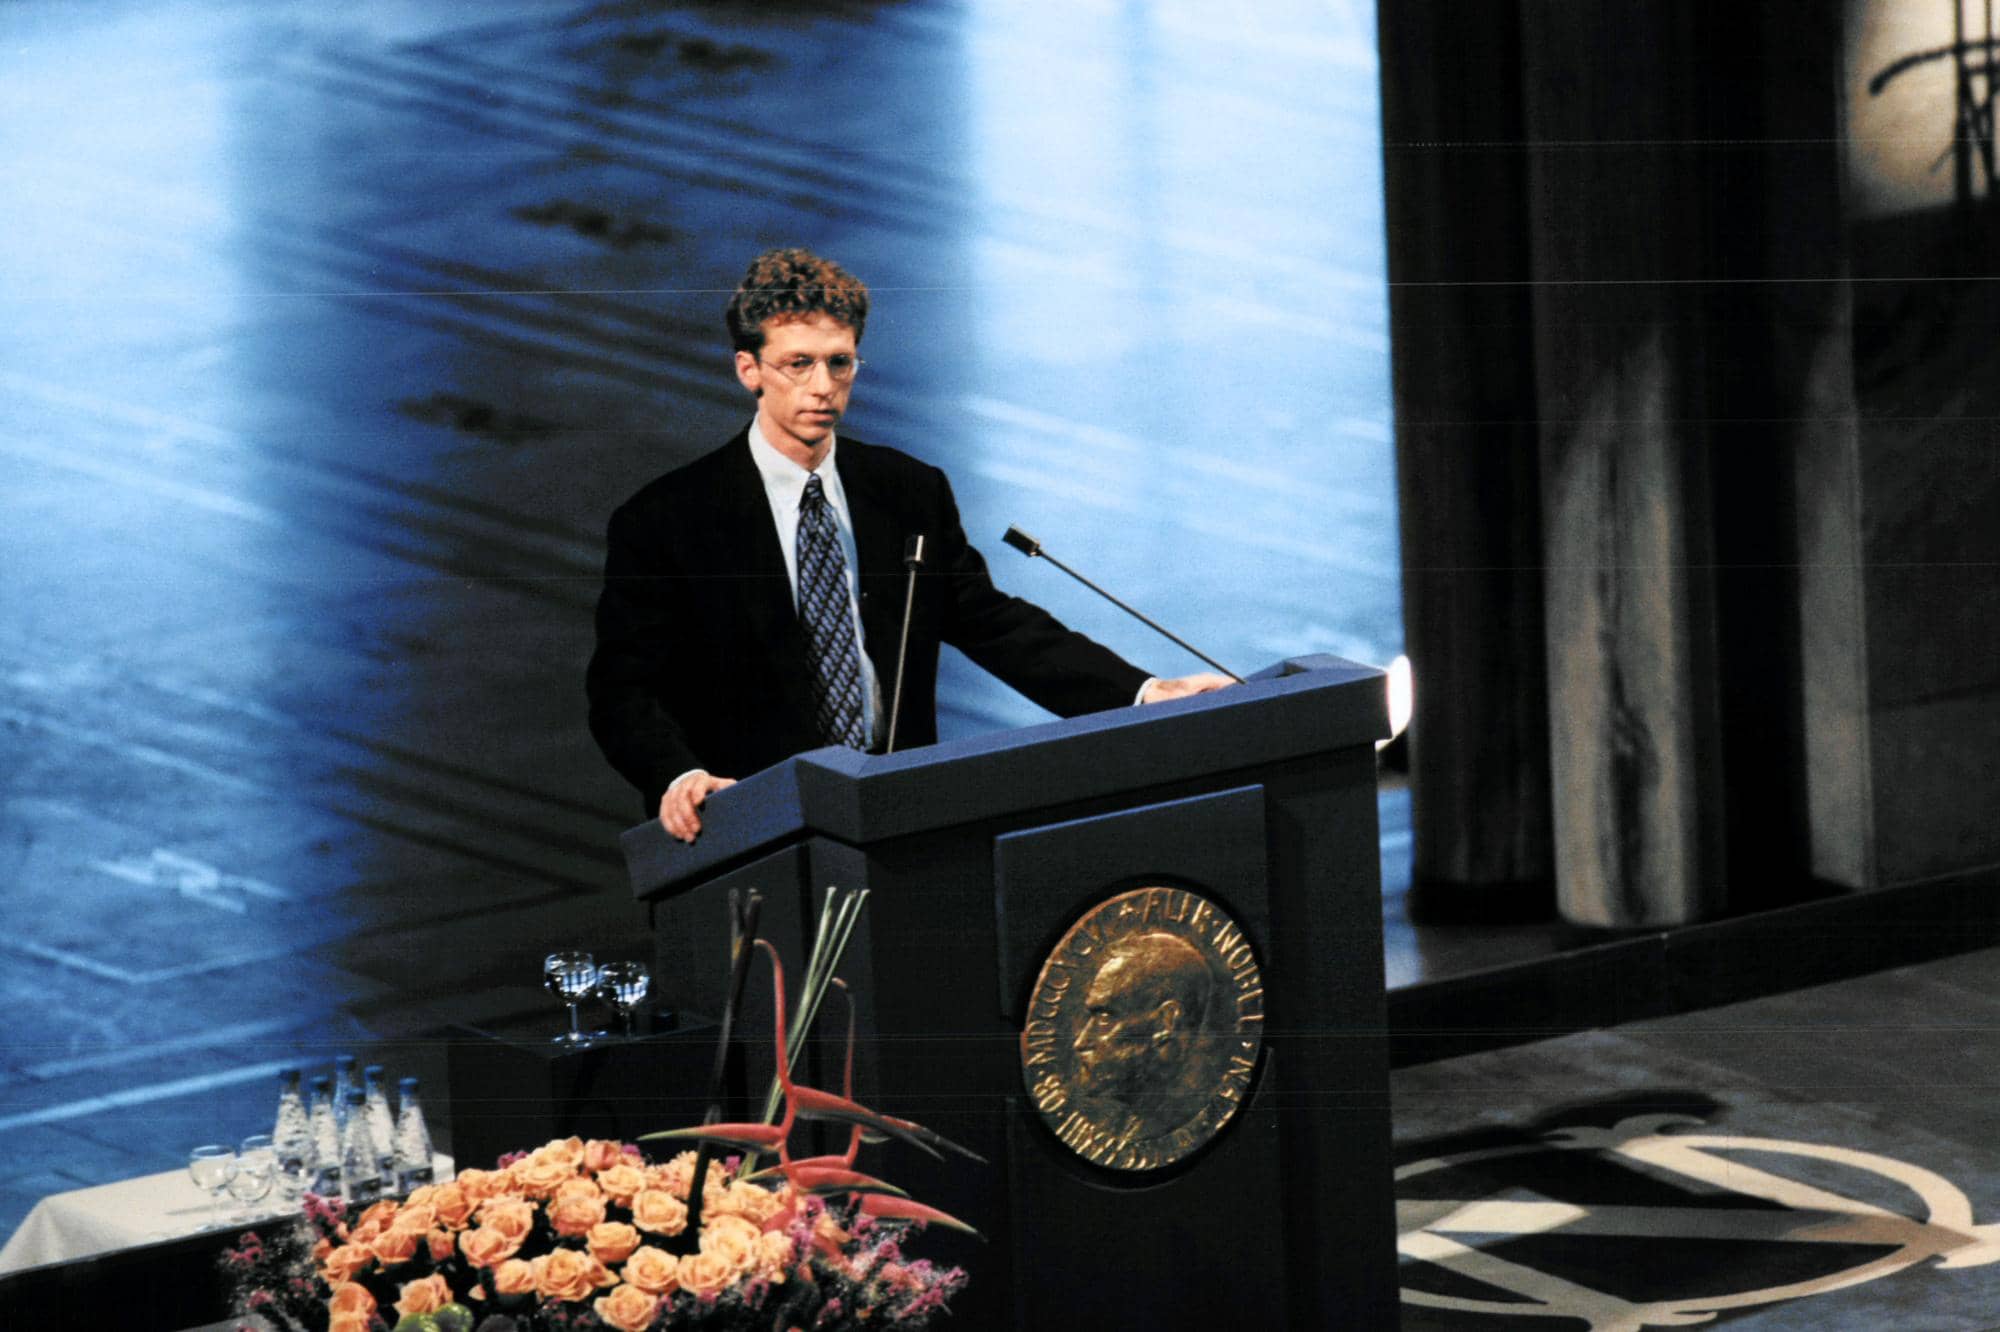 Dr James Orbinski, former President of the MSF International Council, accepting the 1999 Nobel Peace Prize on behalf of Médecins Sans Frontières in Oslo, Norway on 10 December 1999